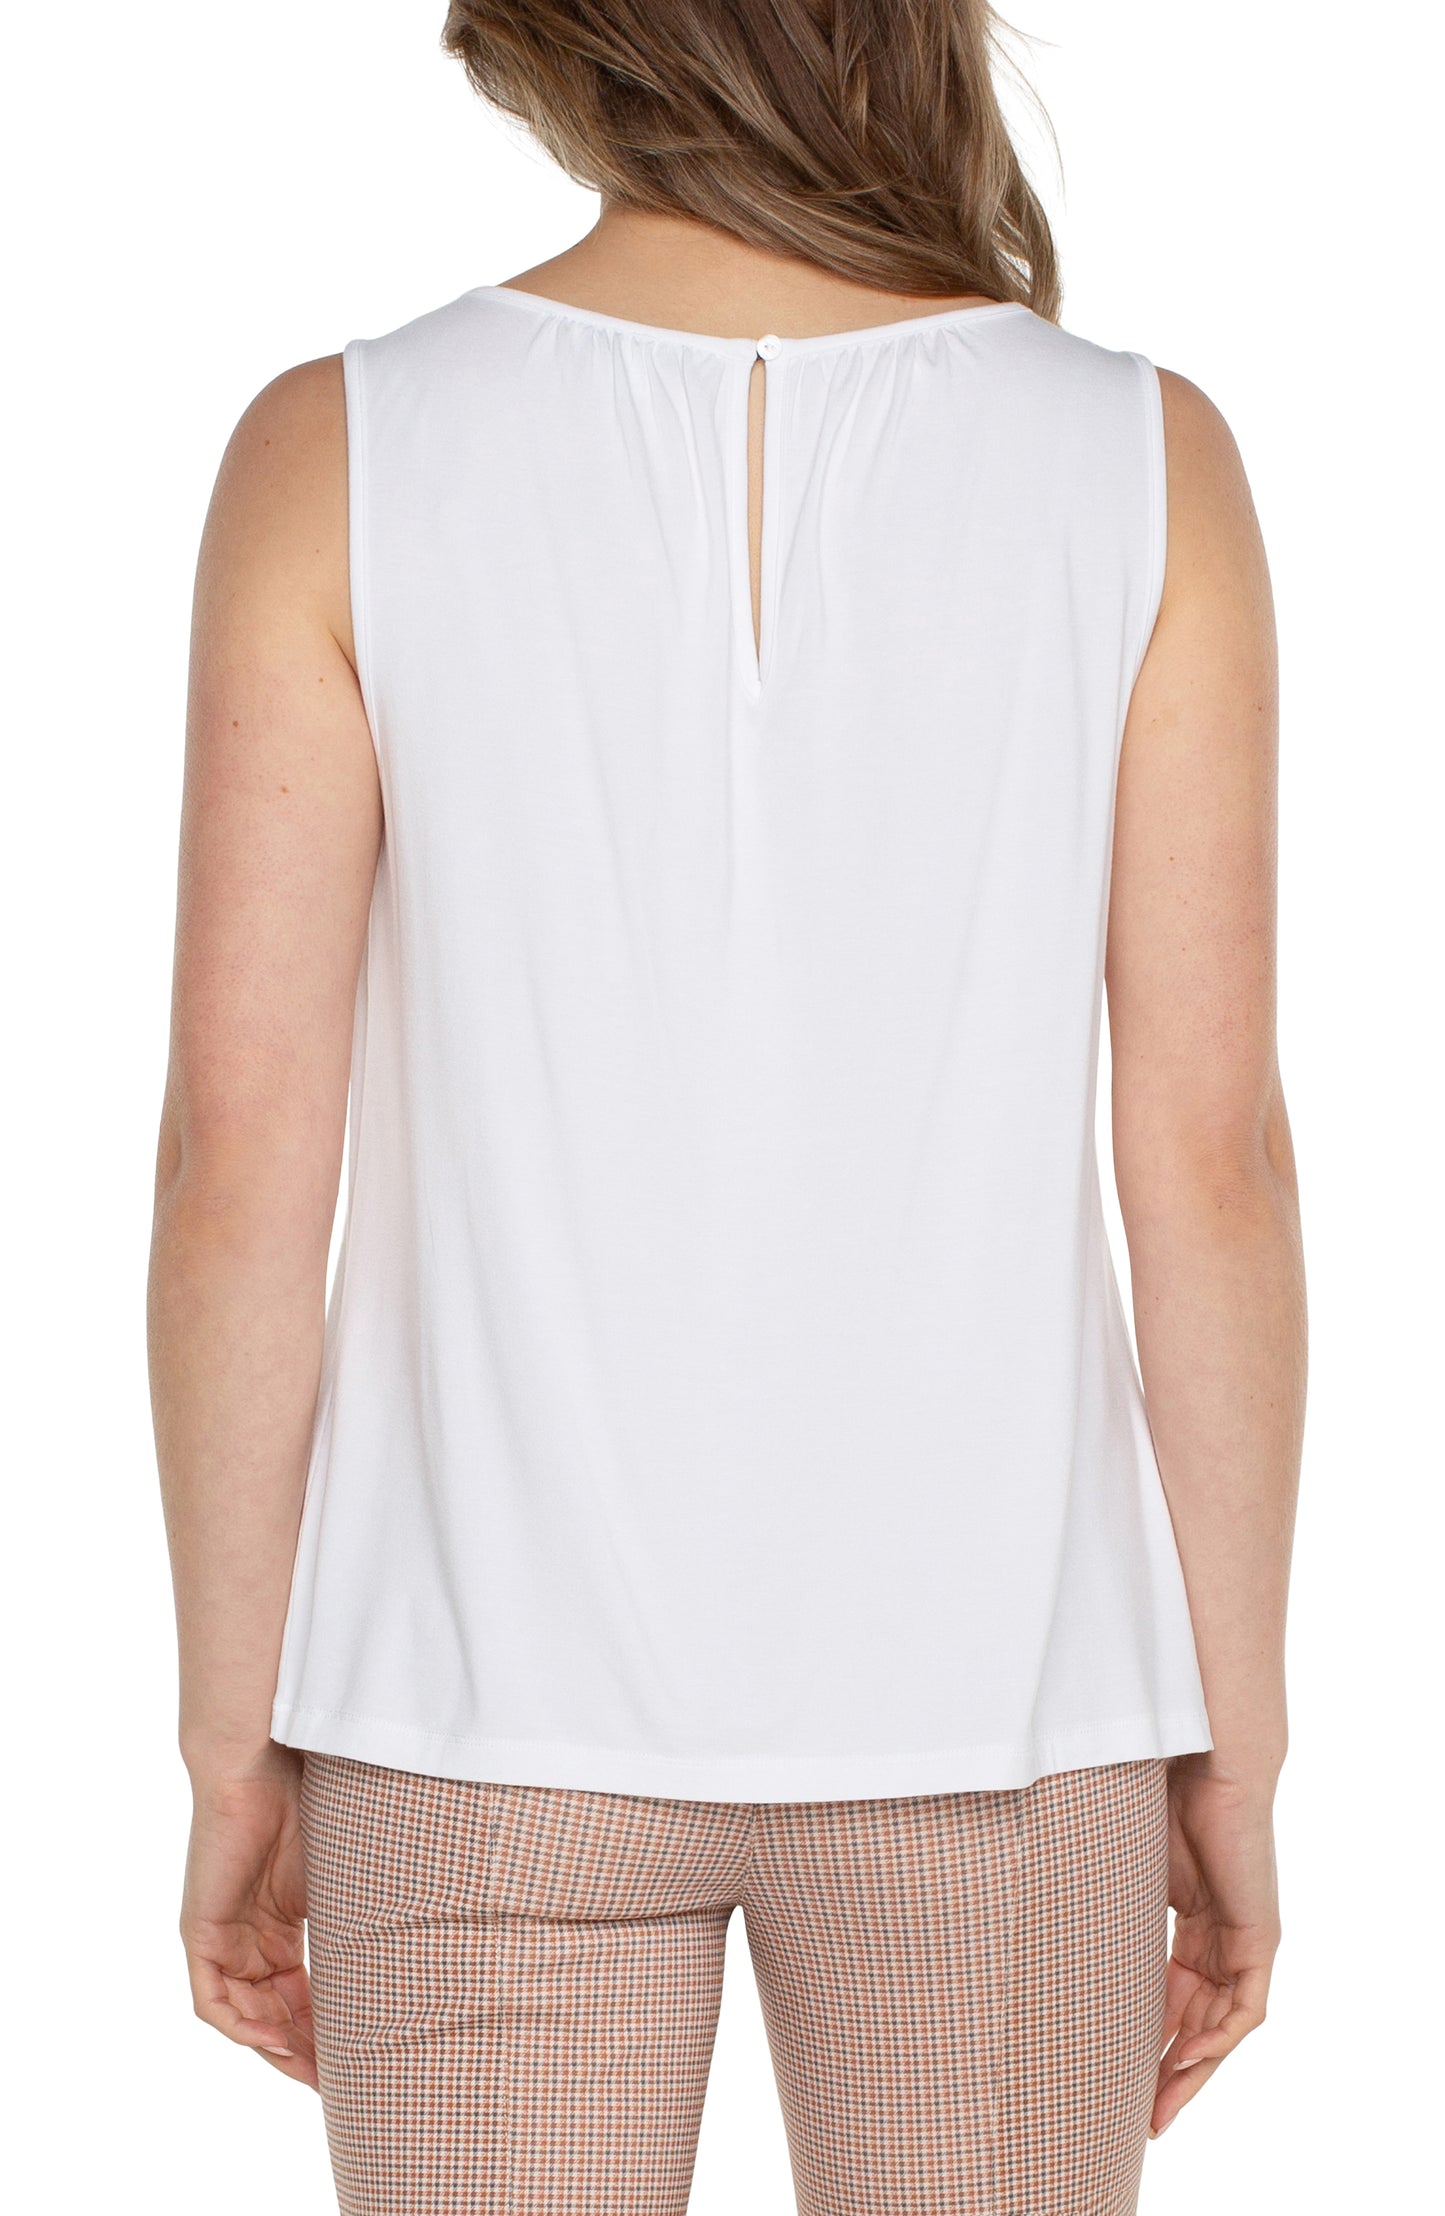 LIVERPOOL A-LINE SLEEVELESS KNIT TOP WITH KEYHOLE